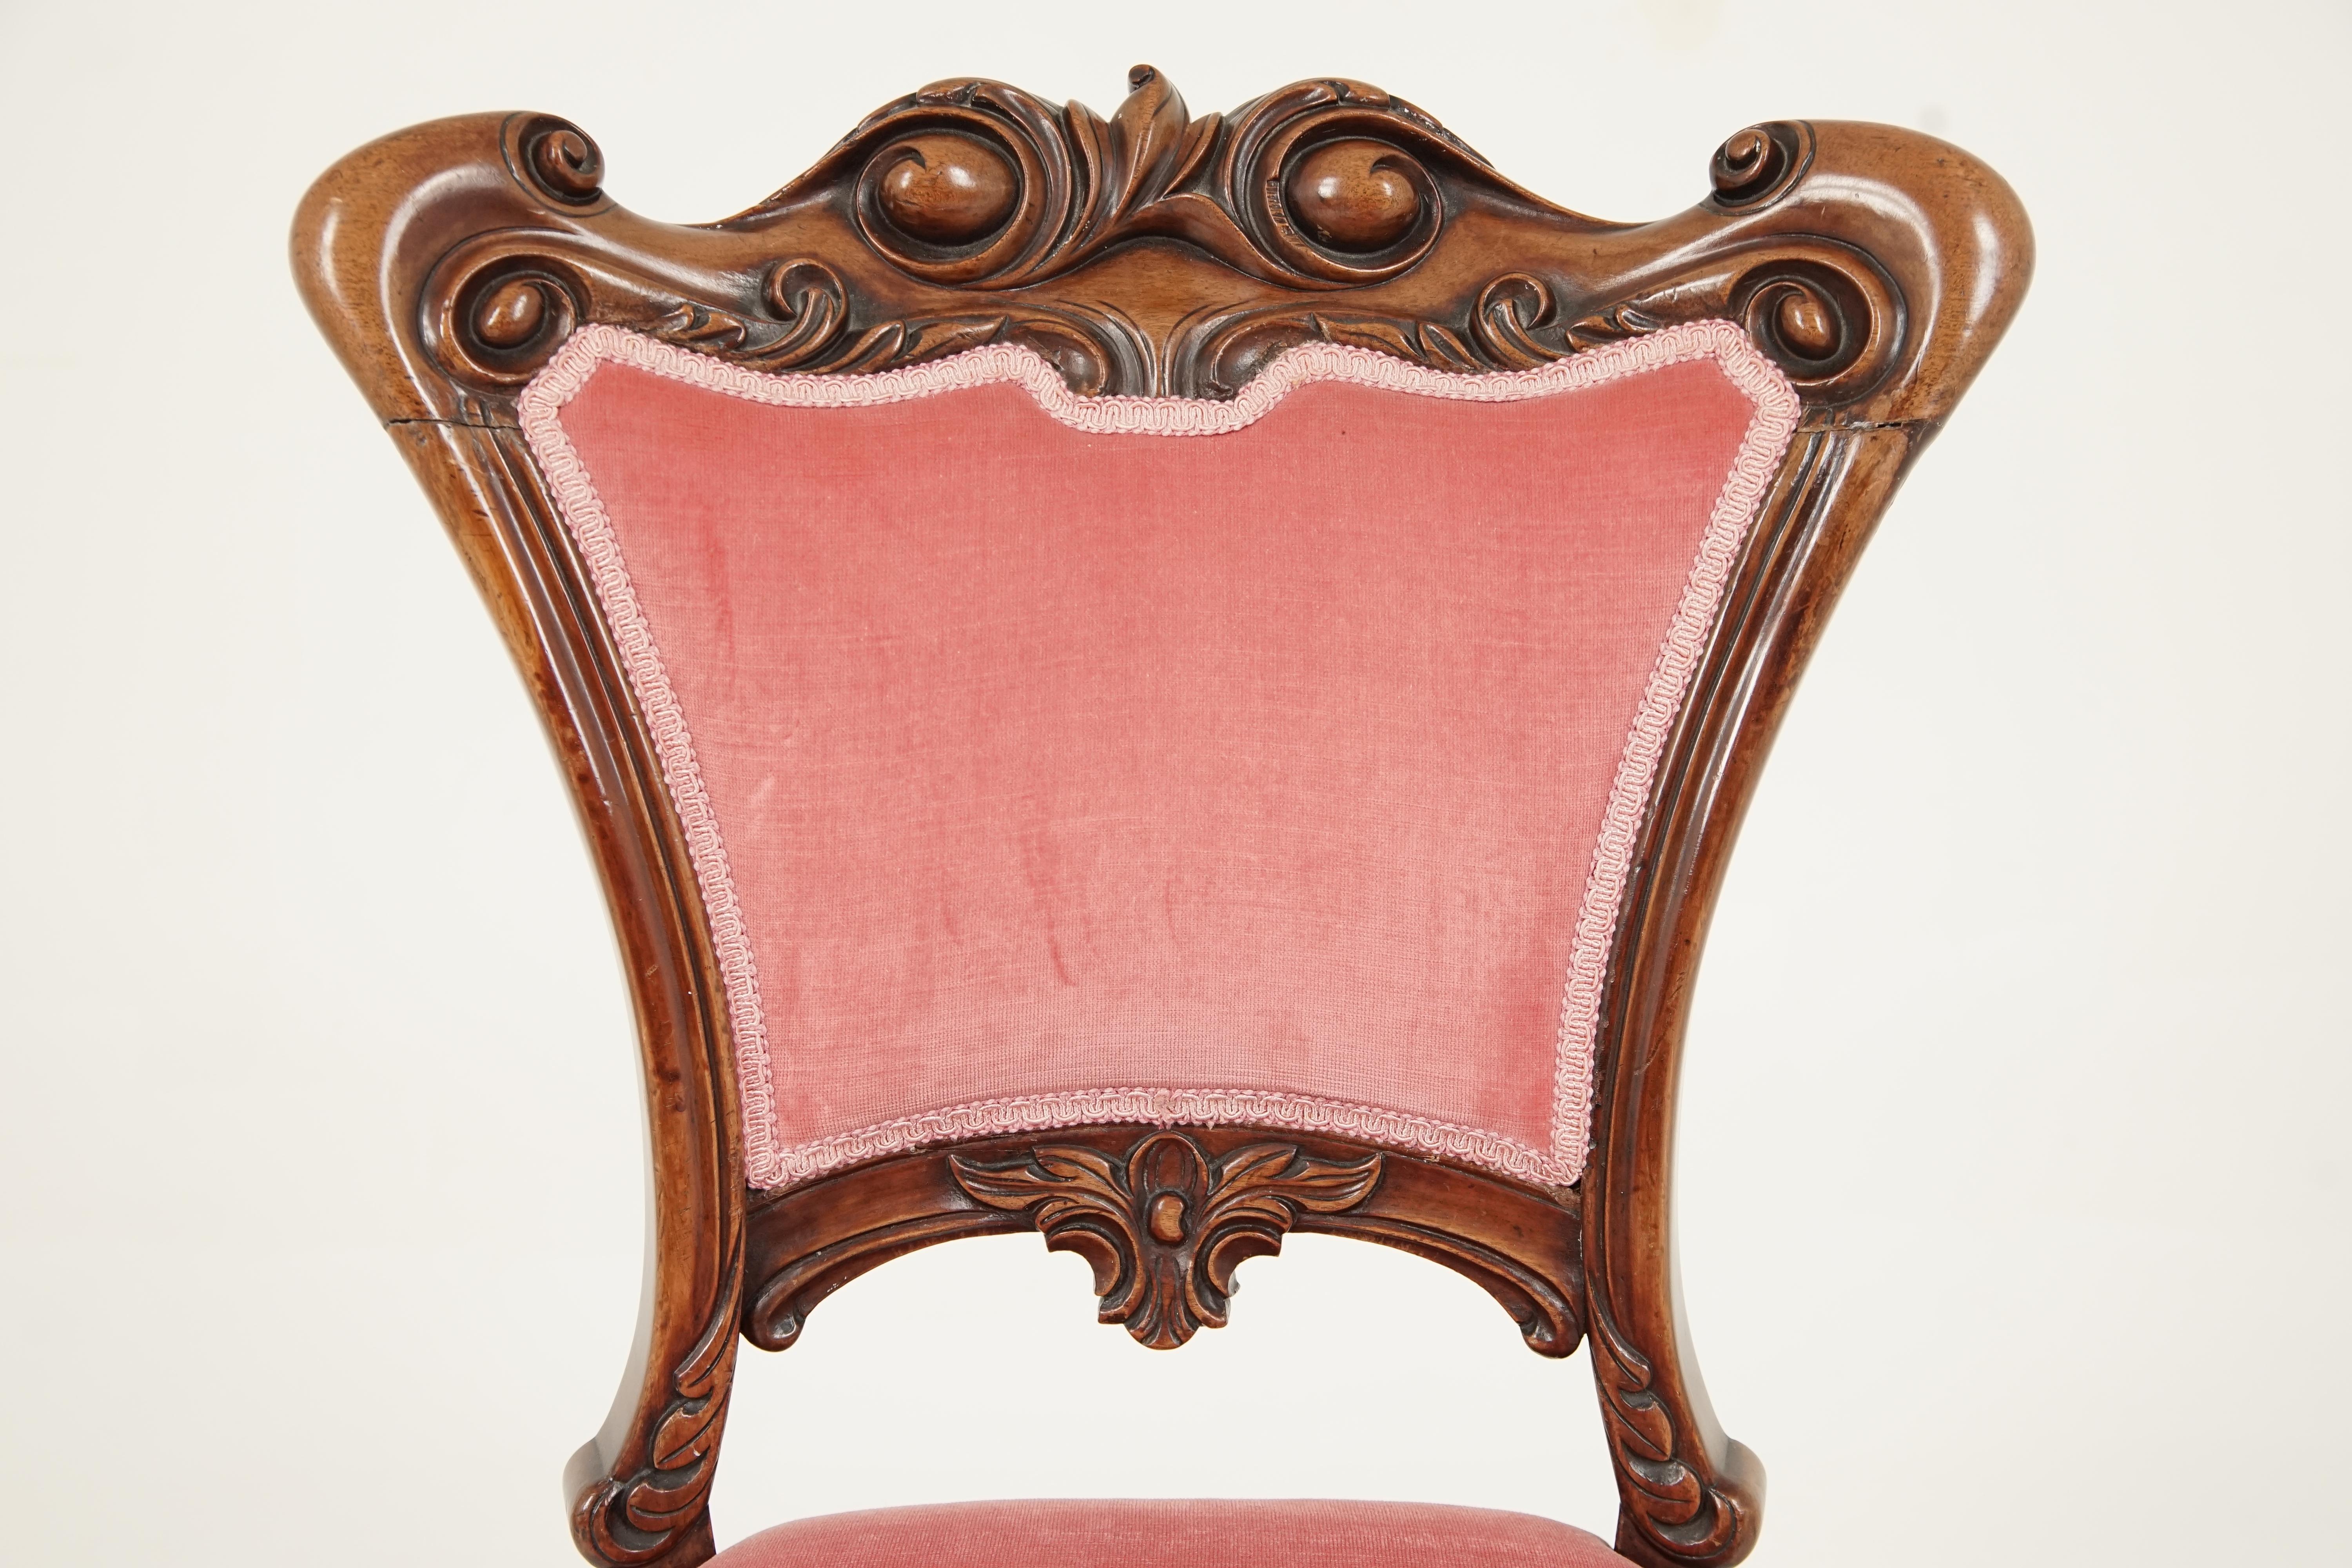 Antique Victorian walnut plum upholstered side parlor chairs, Scotland 1860, B2746

Scotland 1860
Solid walnut 
Original finish 
Beautiful carved top rail with shaped upholstered back with carved rail underneath
Serpentine upholstered